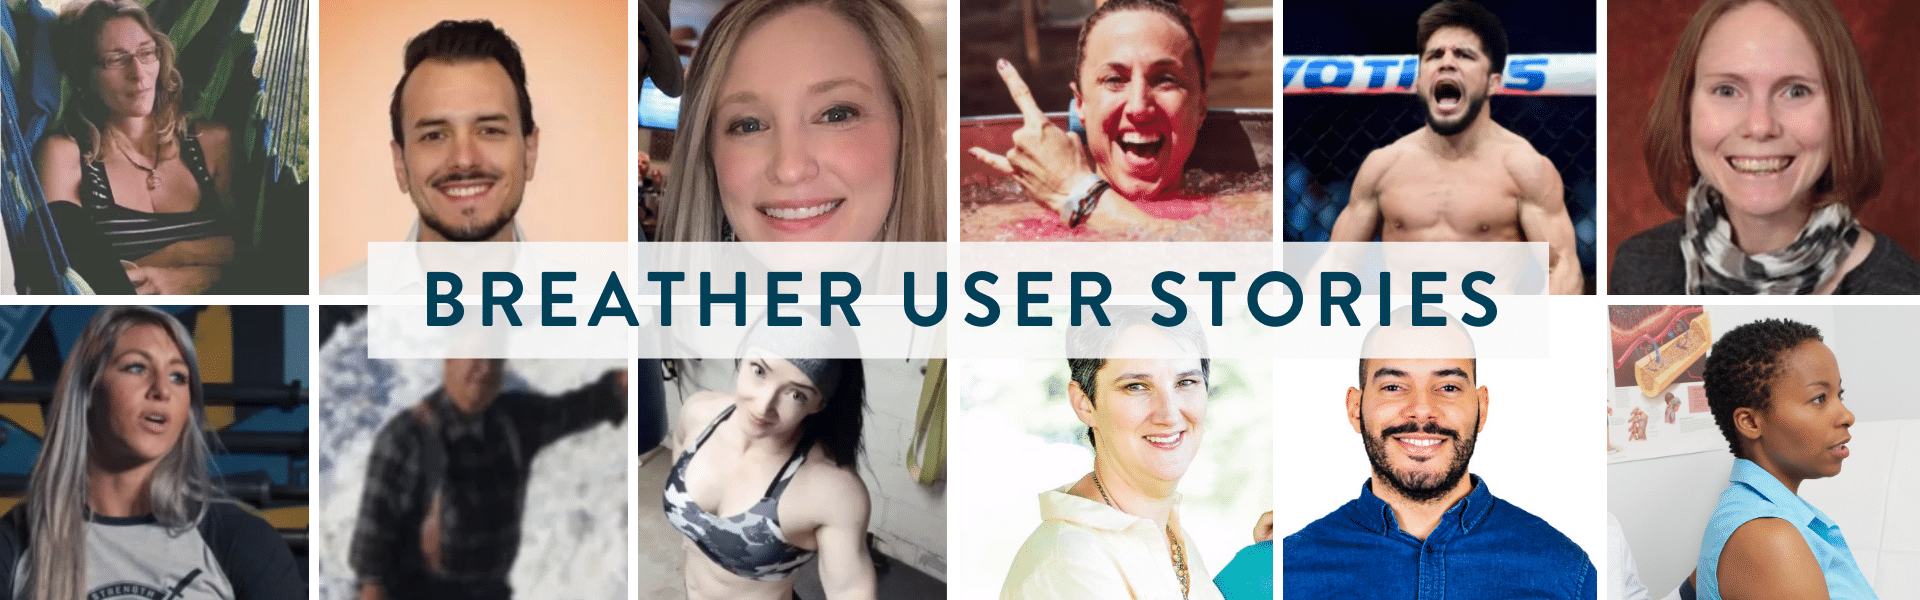 Breather User Stories